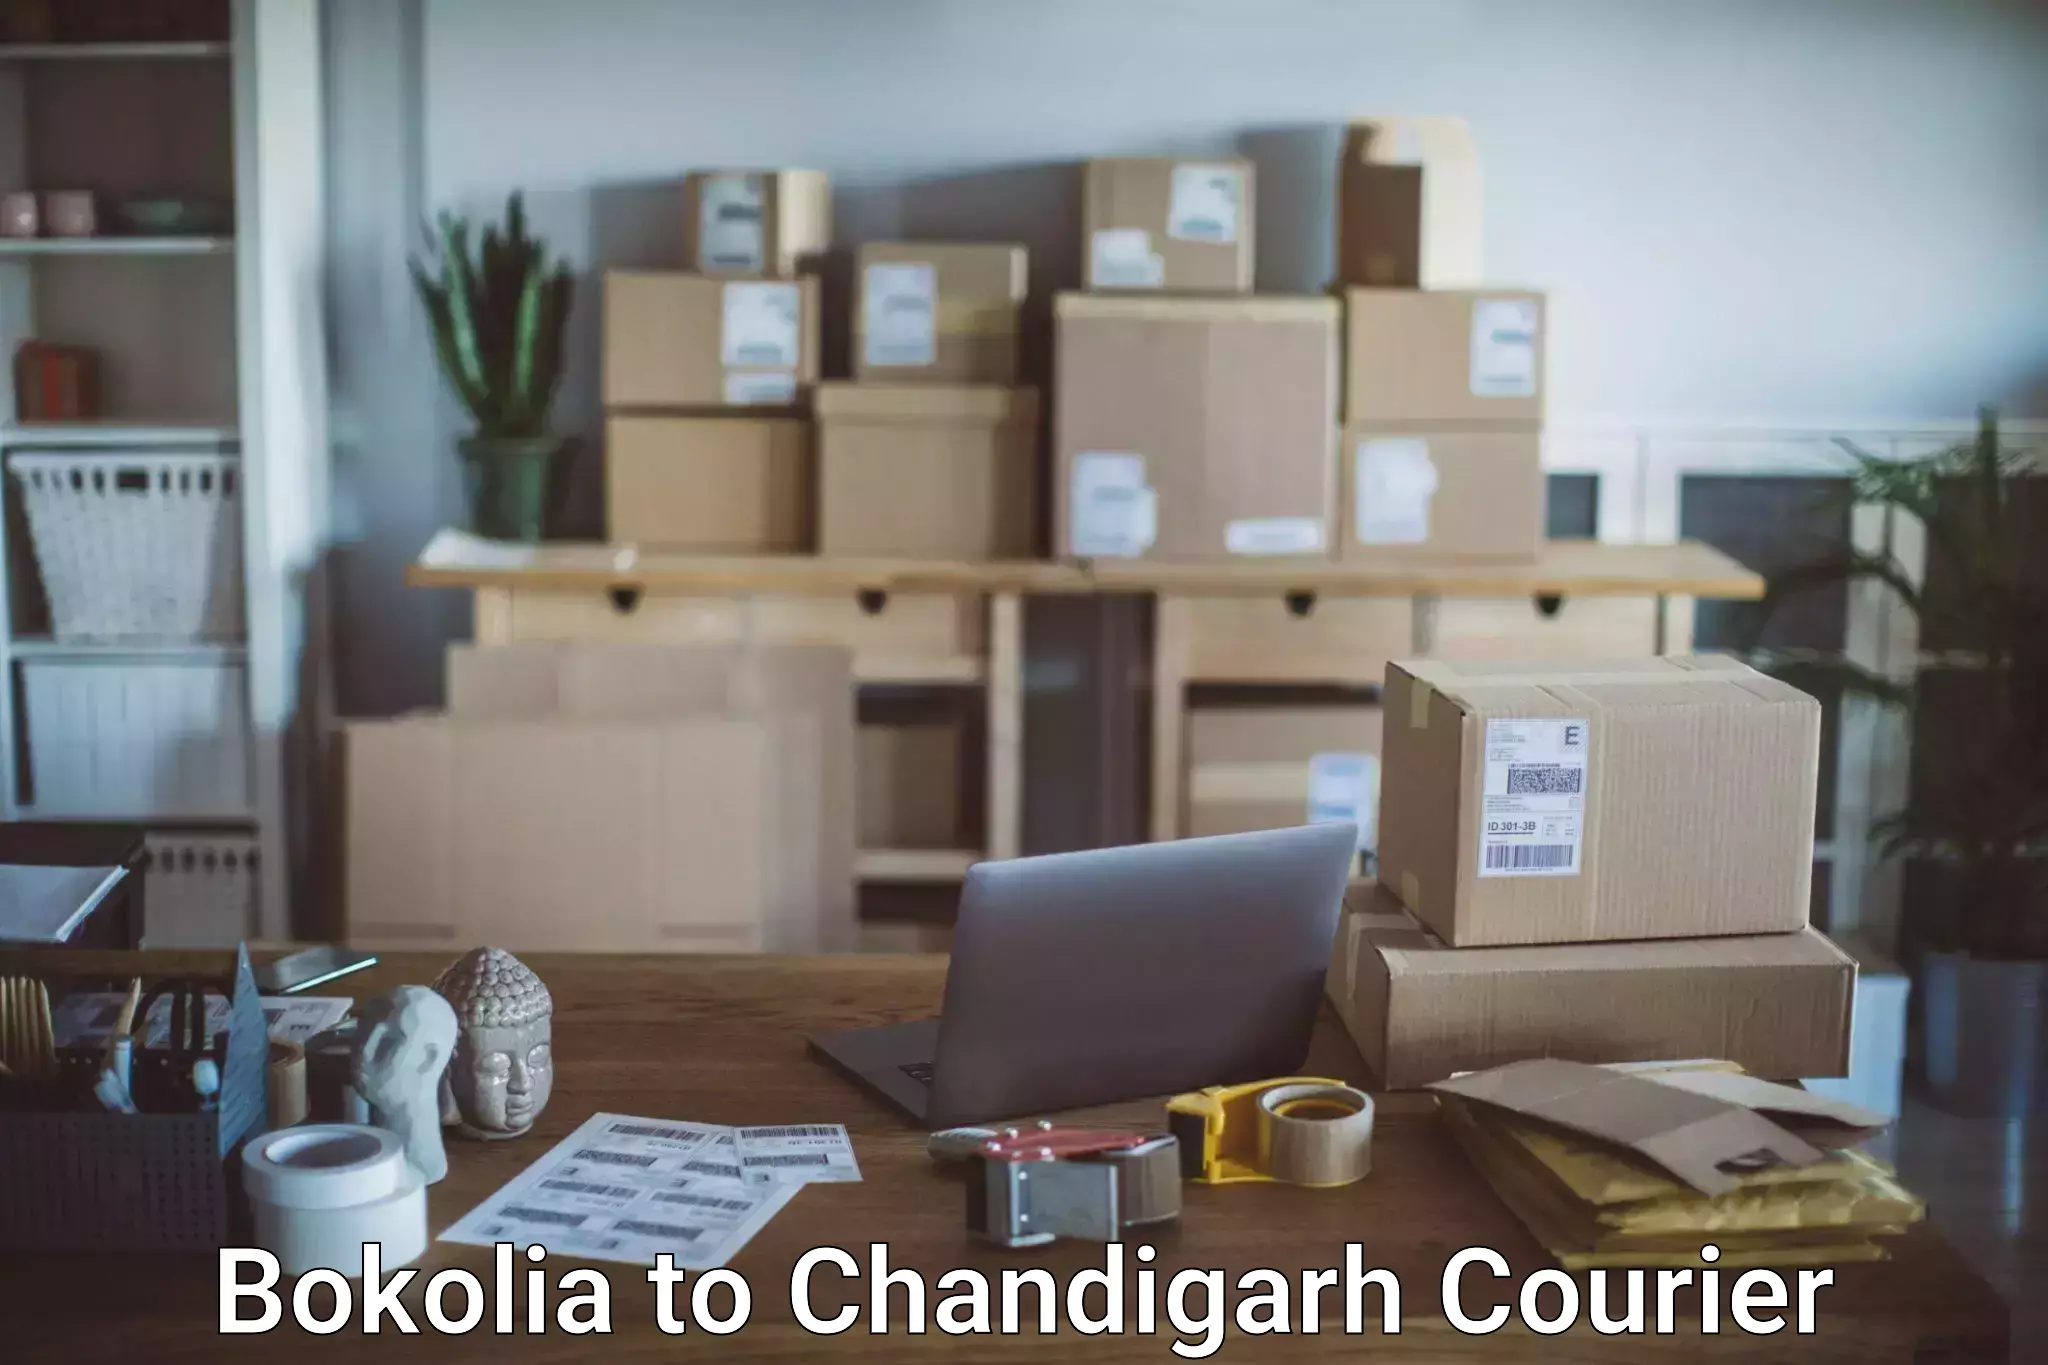 Weekend baggage shipping in Bokolia to Chandigarh